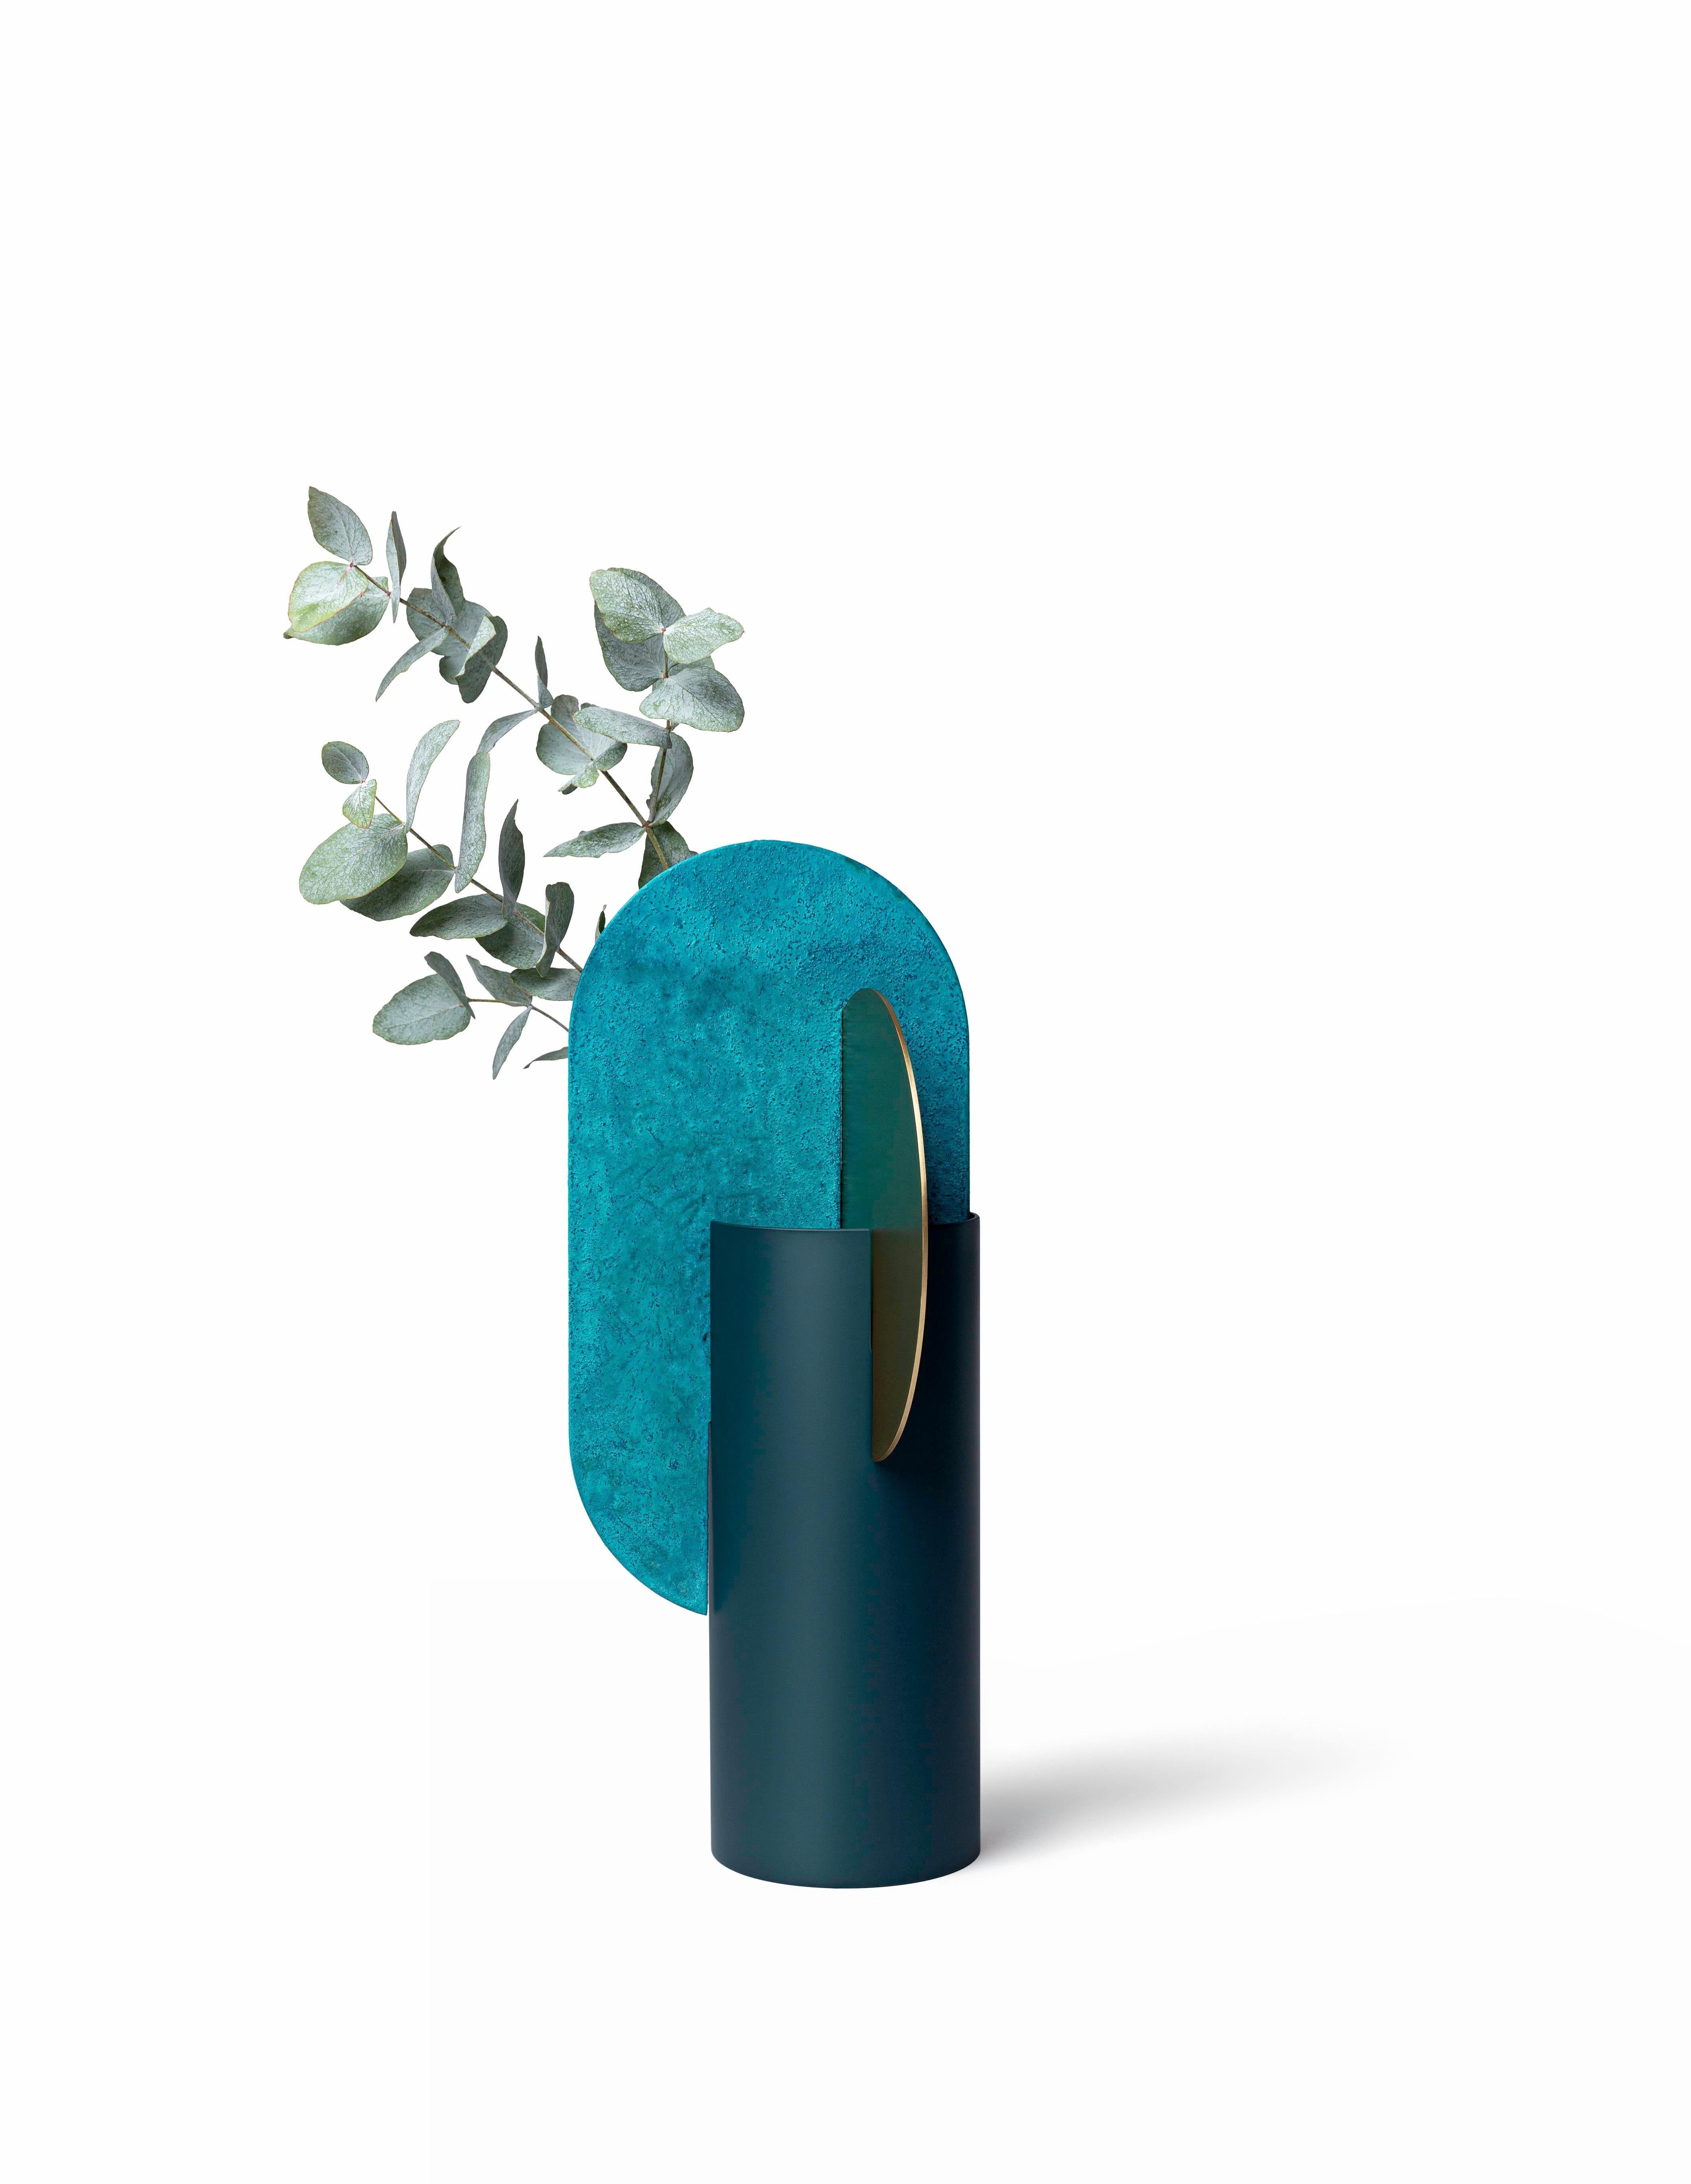 Organic Modern Contemporary Vase 'Yermilov CSL4' by NOOM, Oxidized Brass and Steel For Sale